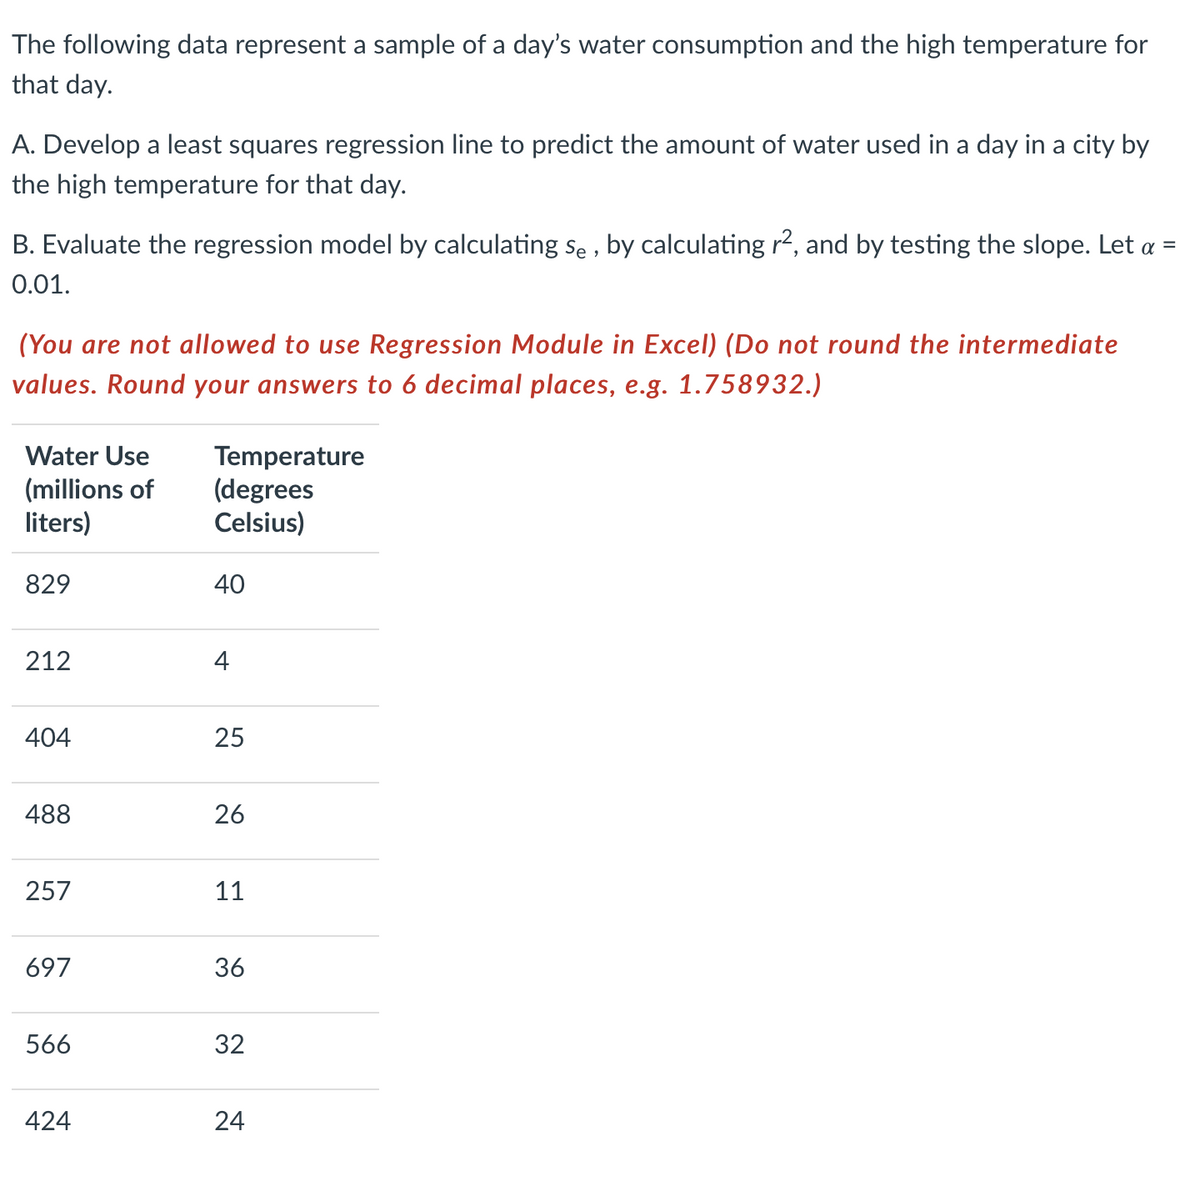 The following data represent a sample of a day's water consumption and the high temperature for
that day.
A. Develop a least squares regression line to predict the amount of water used in a day in a city by
the high temperature for that day.
B. Evaluate the regression model by calculating se , by calculating r2, and by testing the slope. Let a =
0.01.
(You are not allowed to use Regression Module in Excel) (Do not round the intermediate
values. Round your answers to 6 decimal places, e.g. 1.758932.)
Water Use
(millions of
liters)
Temperature
(degrees
Celsius)
829
40
212
4
404
25
488
26
257
11
697
36
566
32
424
24
